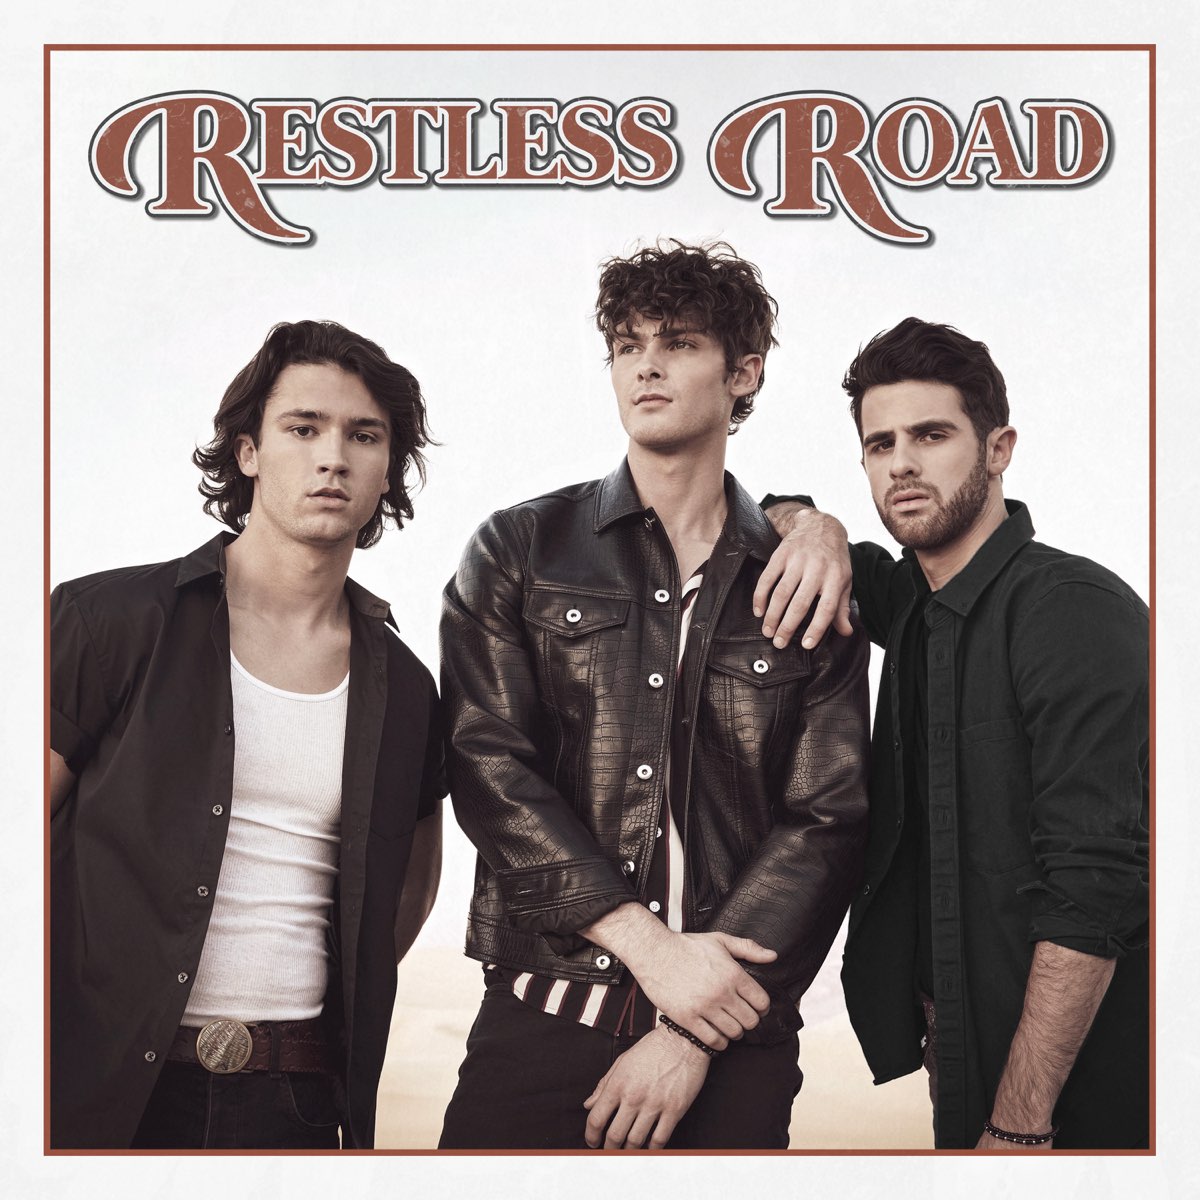 ‎Restless Road EP by Restless Road on Apple Music